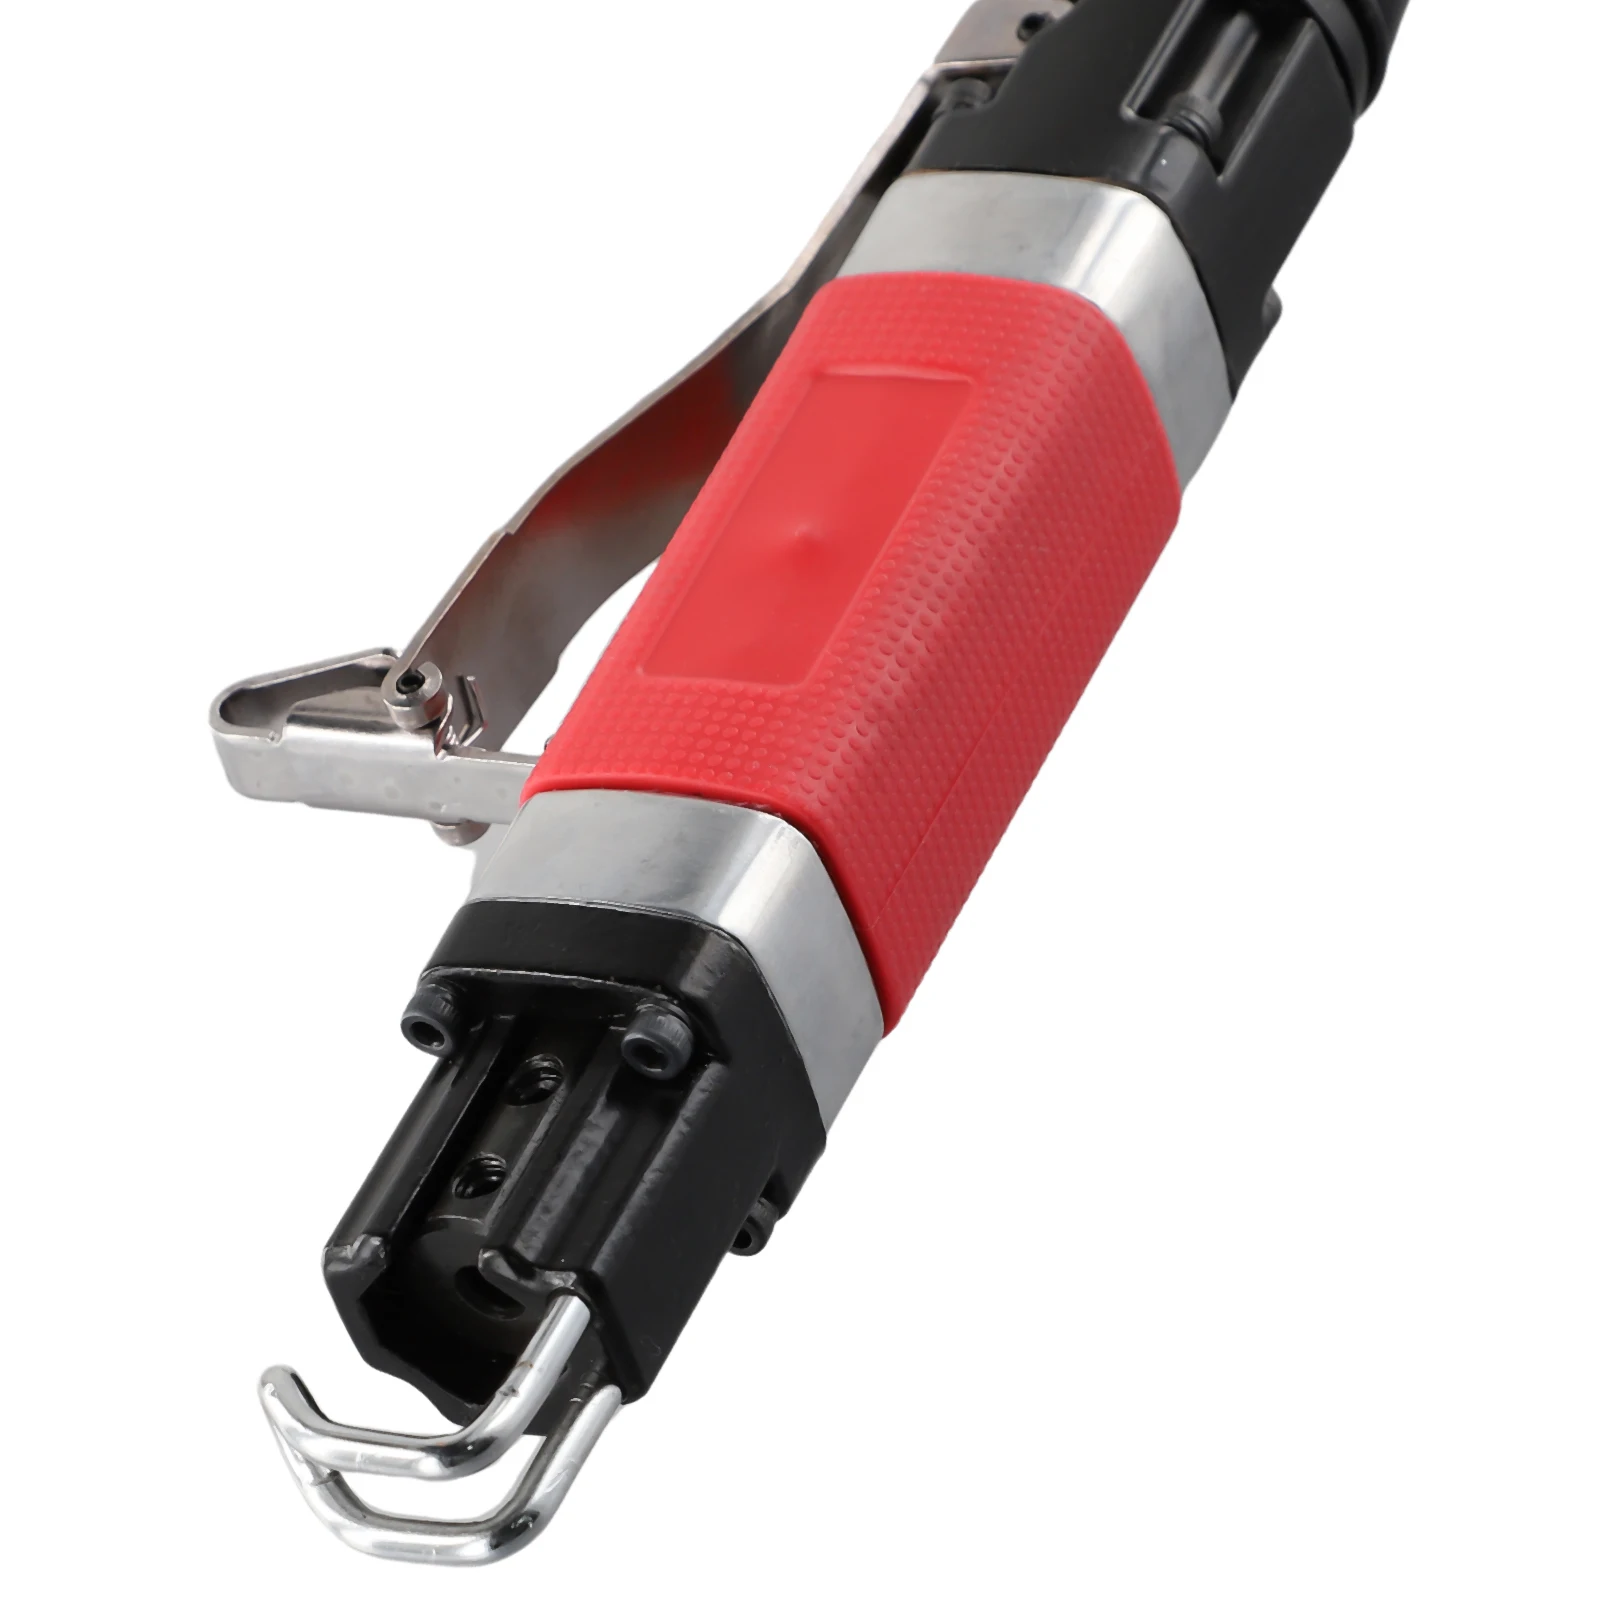 

Premium Quality Pneumatic File Provides Smooth Operation and High Efficiency Perfect for Rust Removal and Polishing